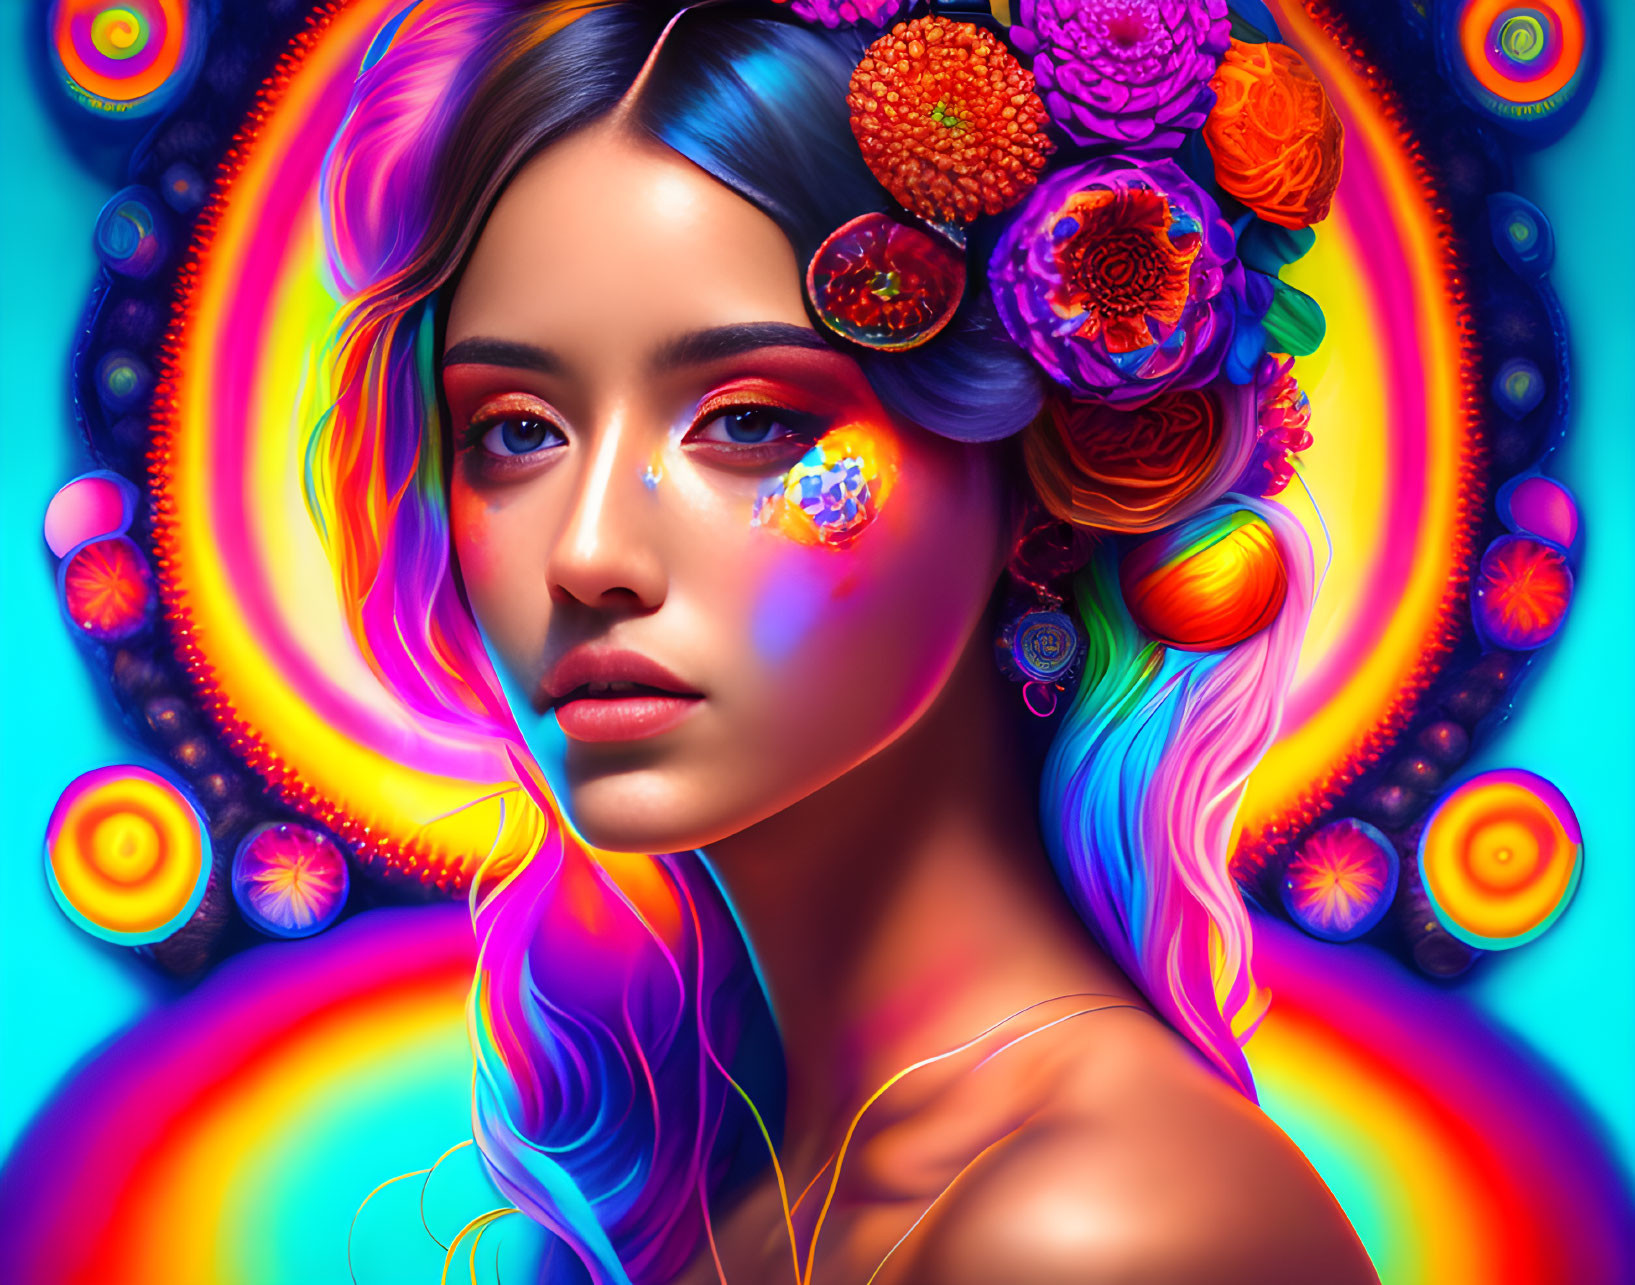 Colorful digital art portrait of woman with blue hair and floral patterns.